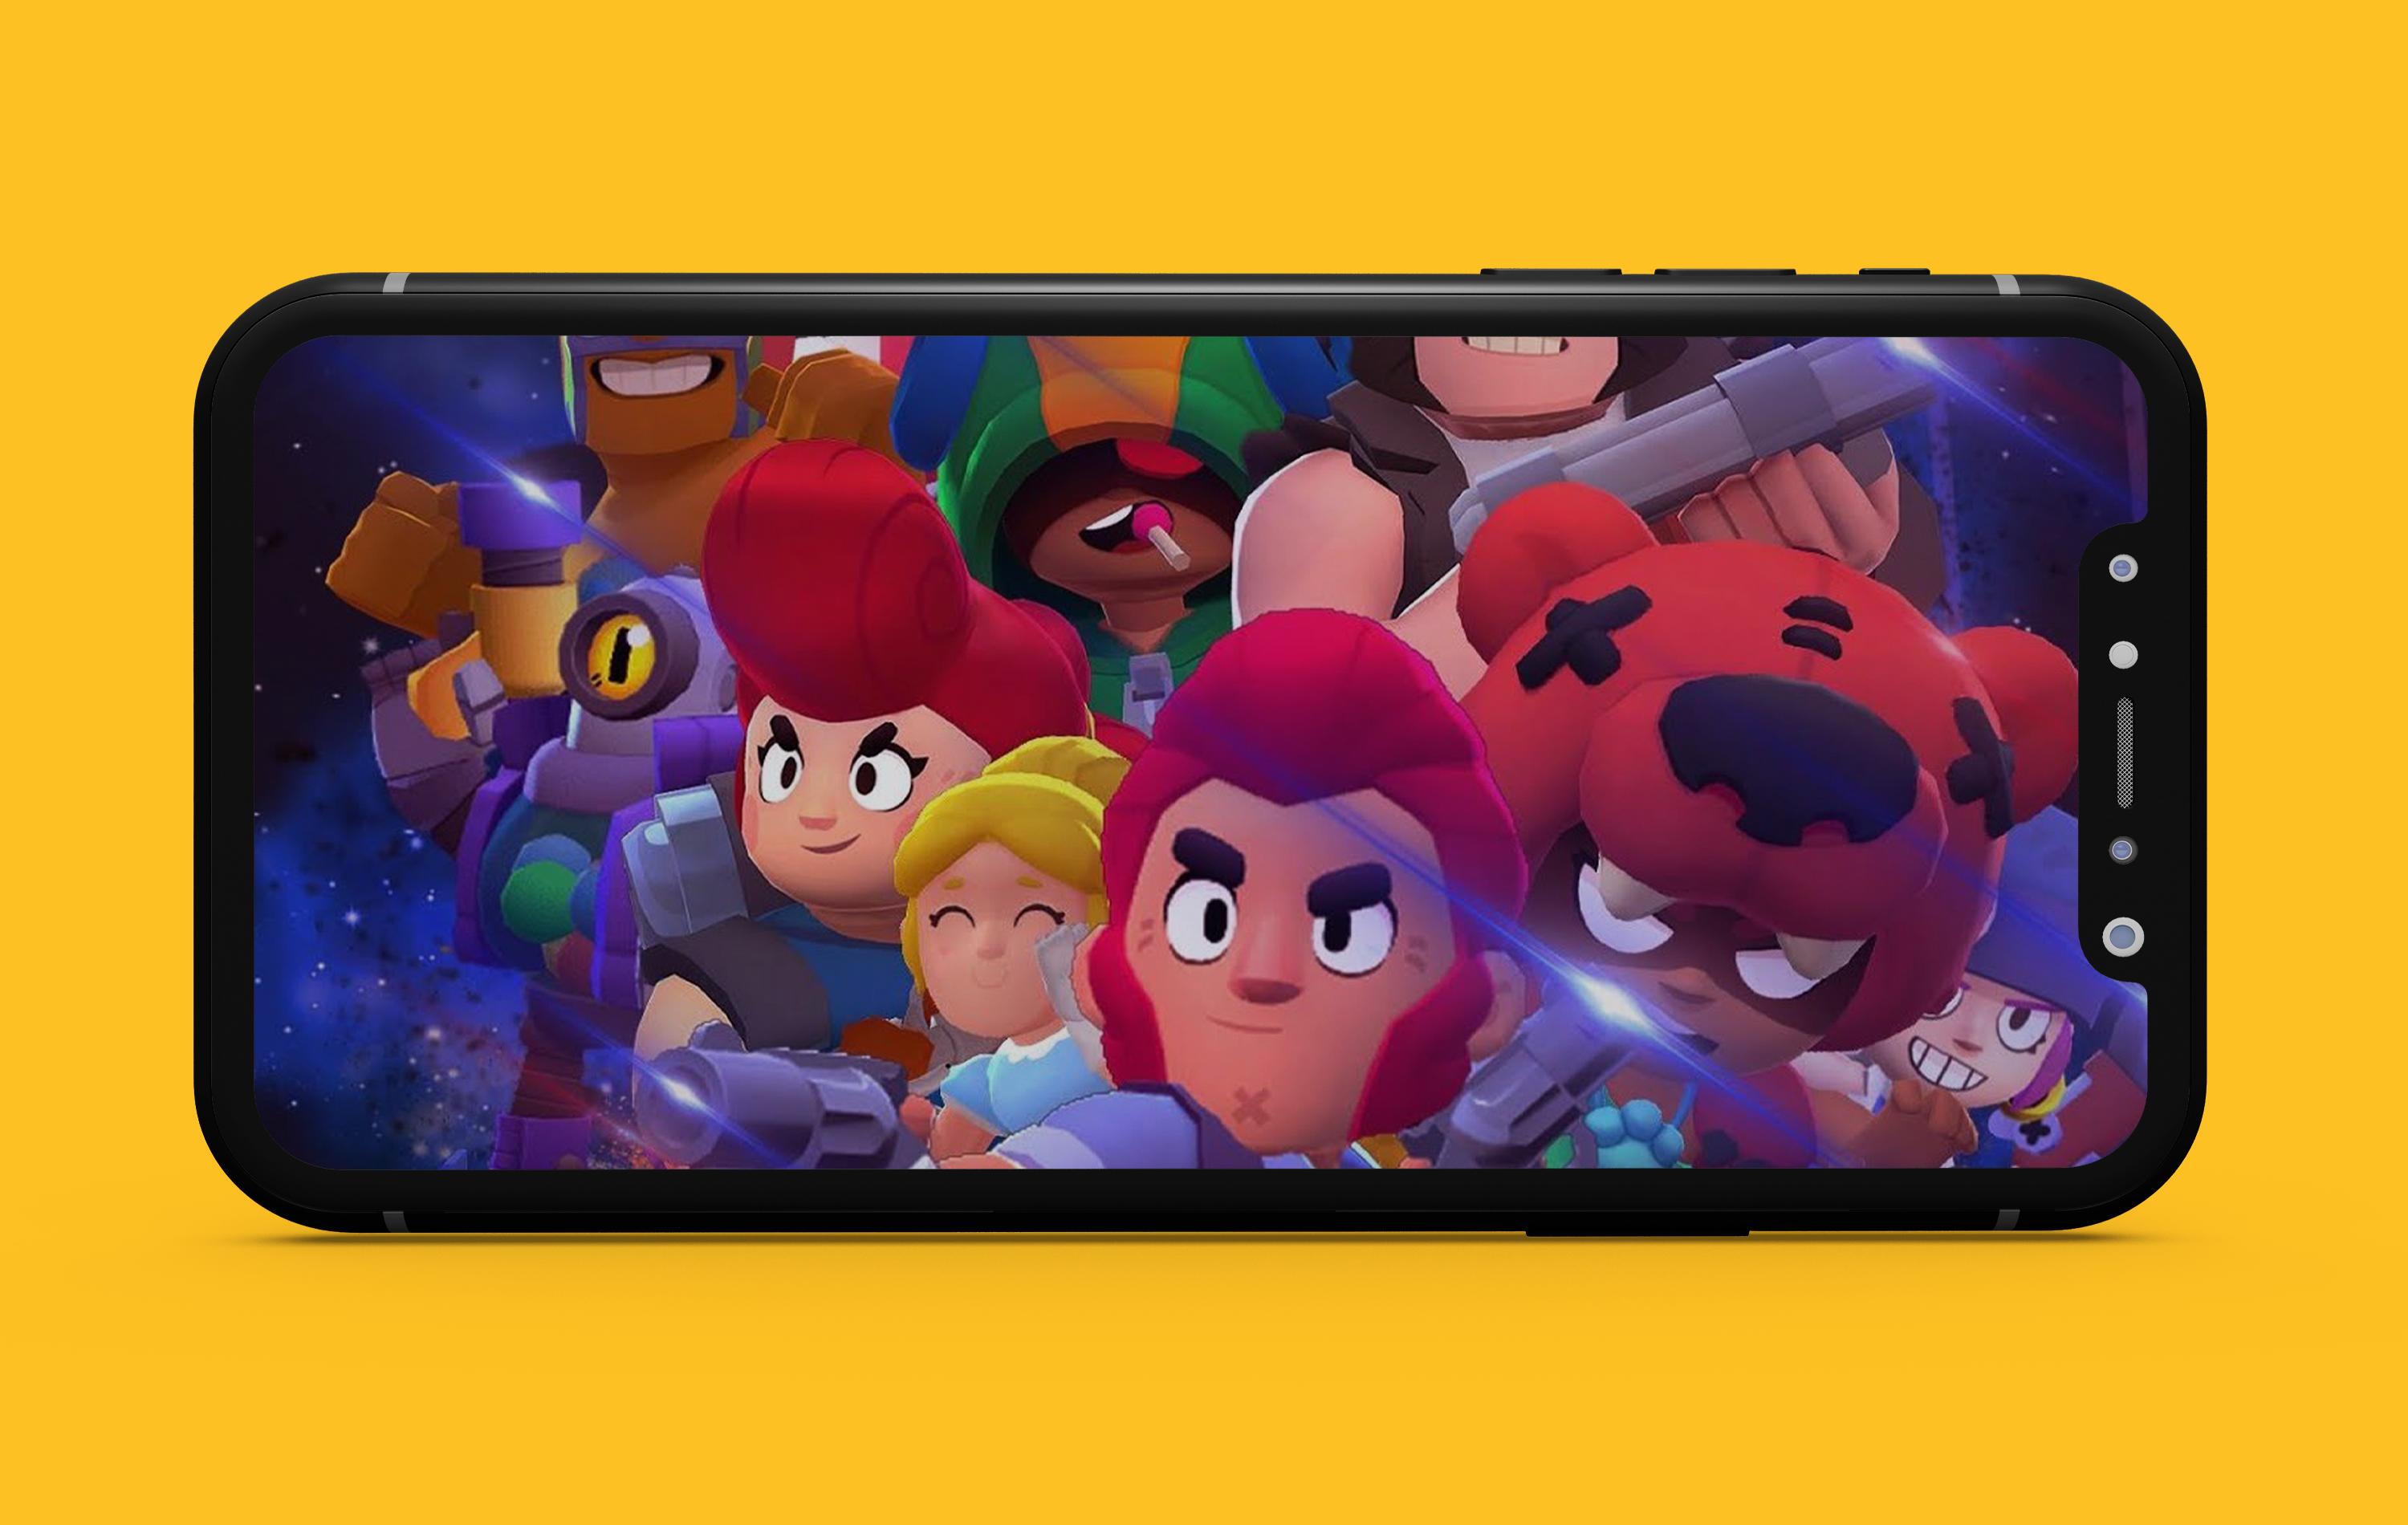 Guide For Brawl Star Mod 2020 For Android Apk Download - brawl stars mod apk download 2020